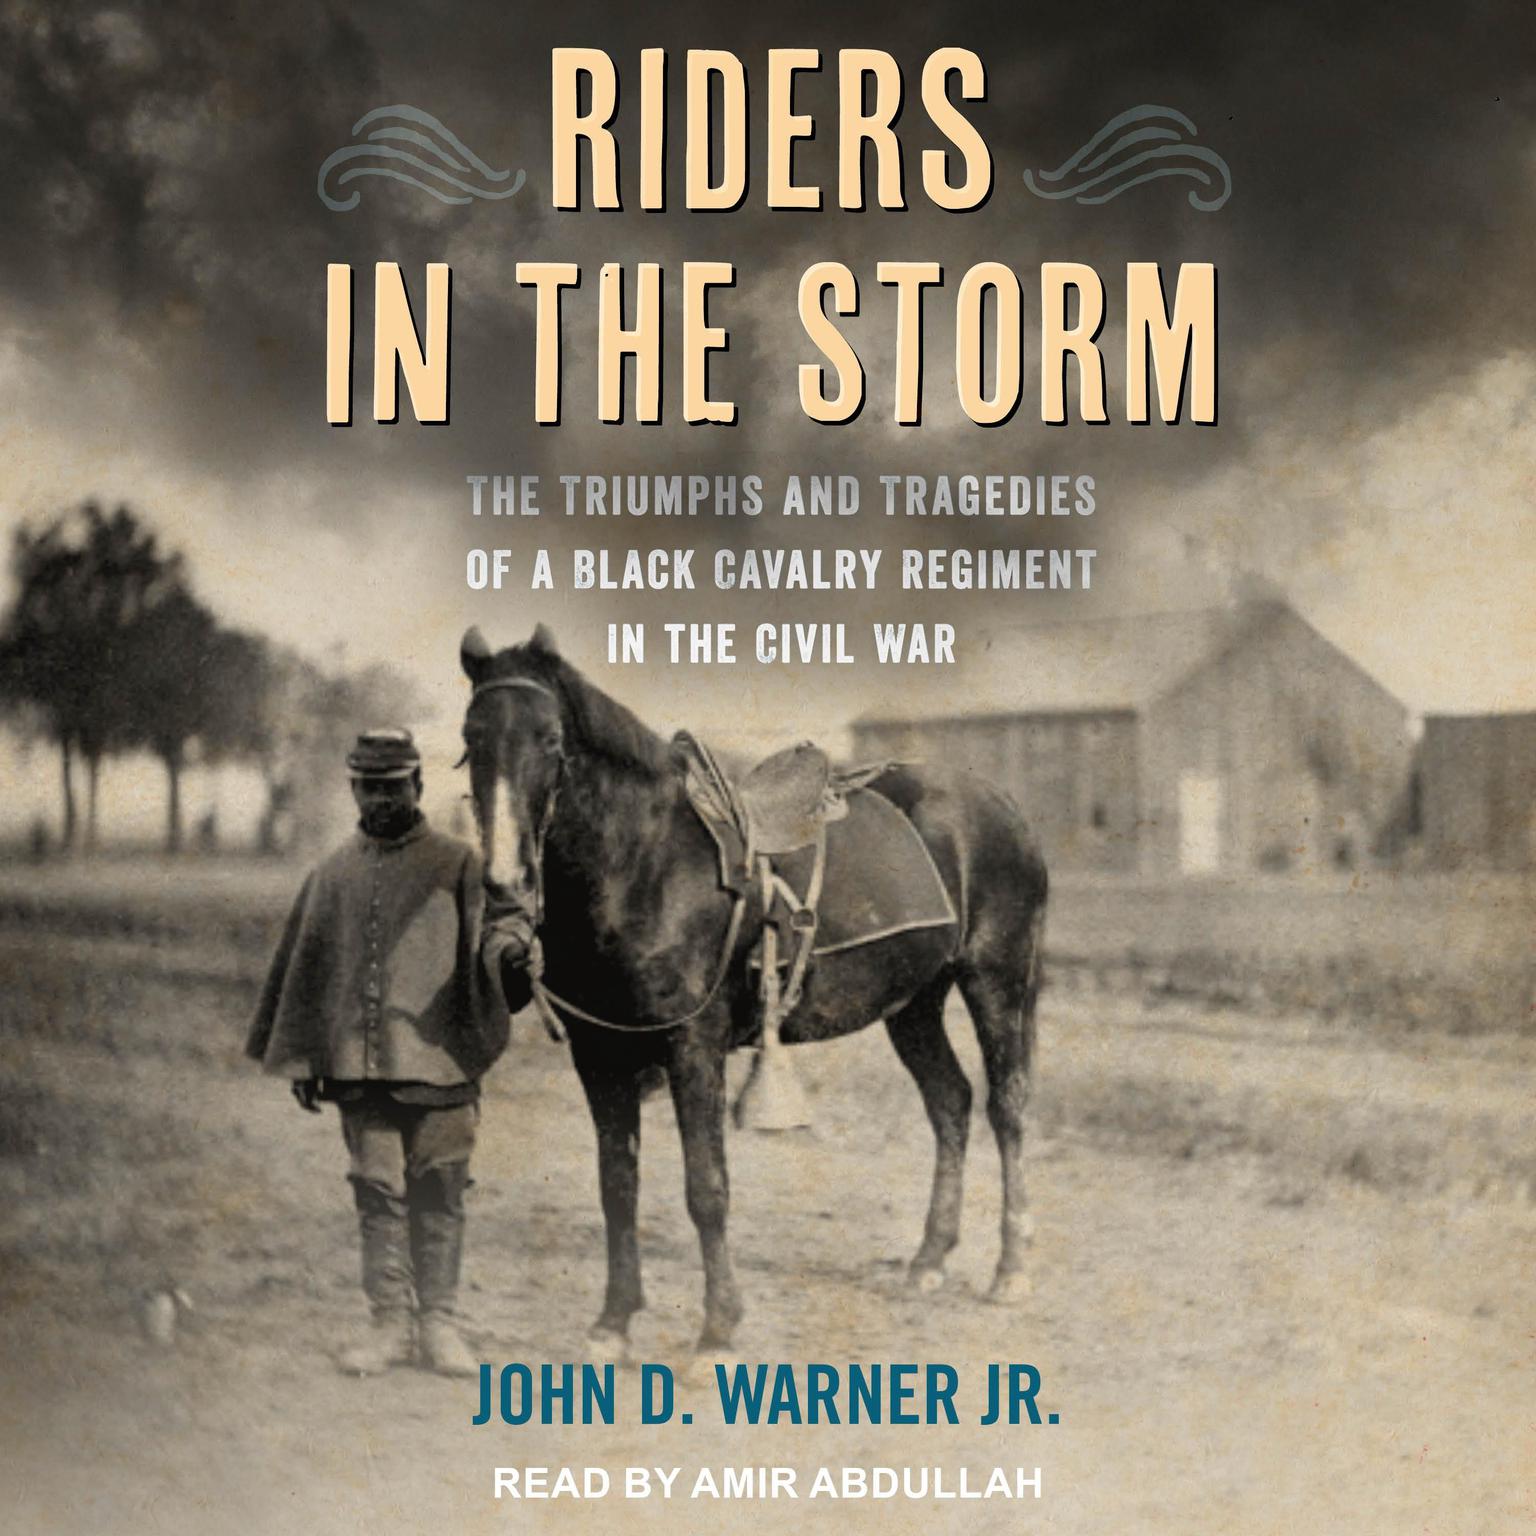 Riders in the Storm: The Triumphs and Tragedies of a Black Cavalry Regiment in the Civil War Audiobook, by John D. Warner